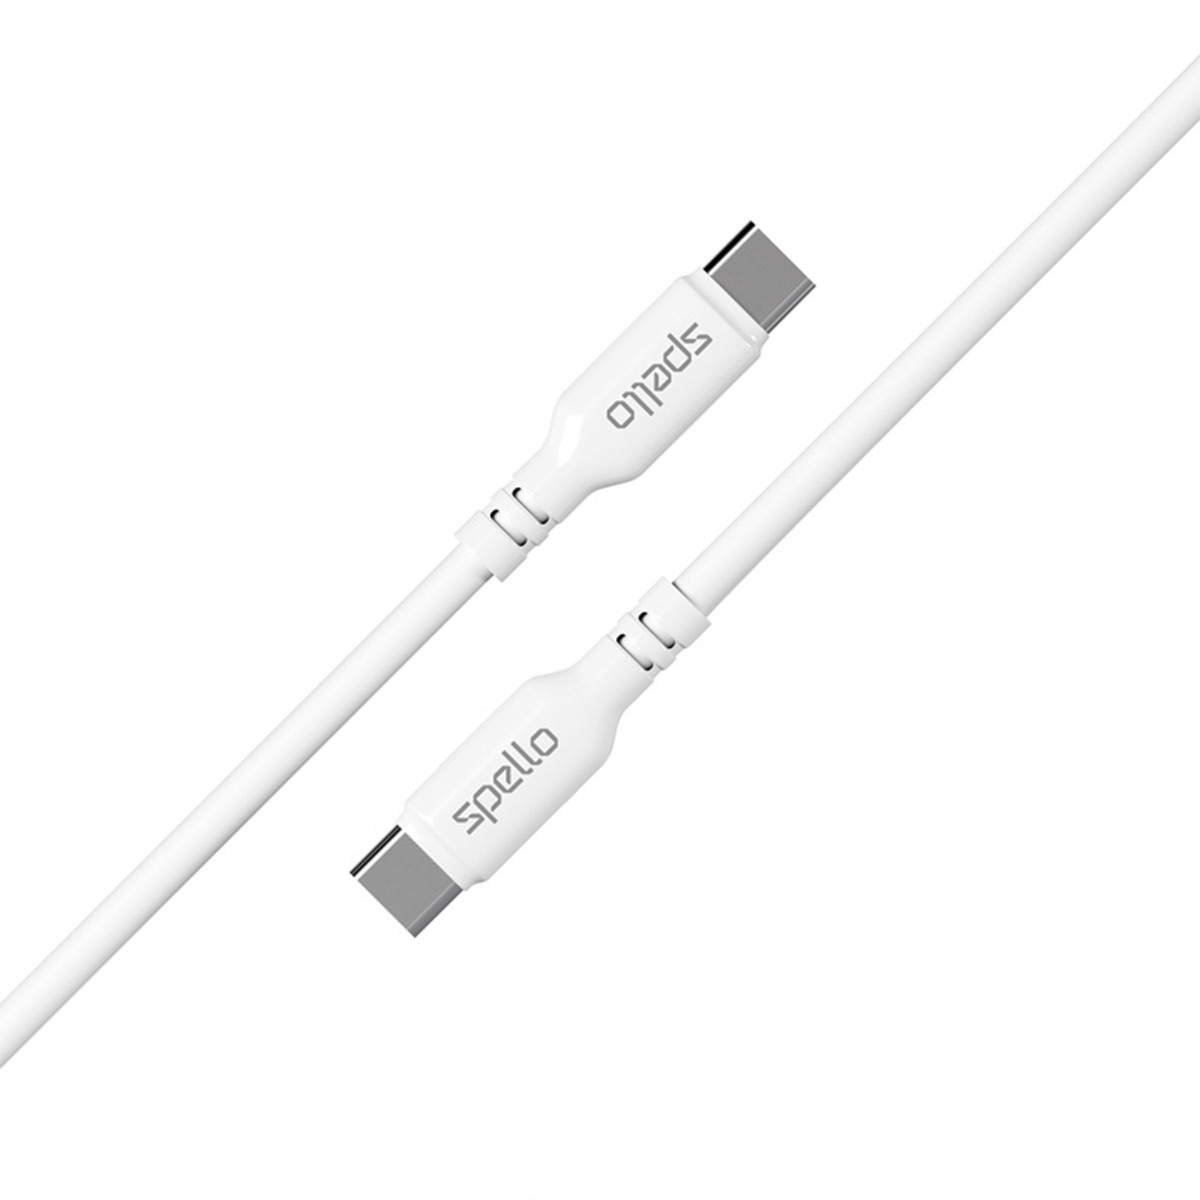 SP USB-C to USB-C Cable 1m